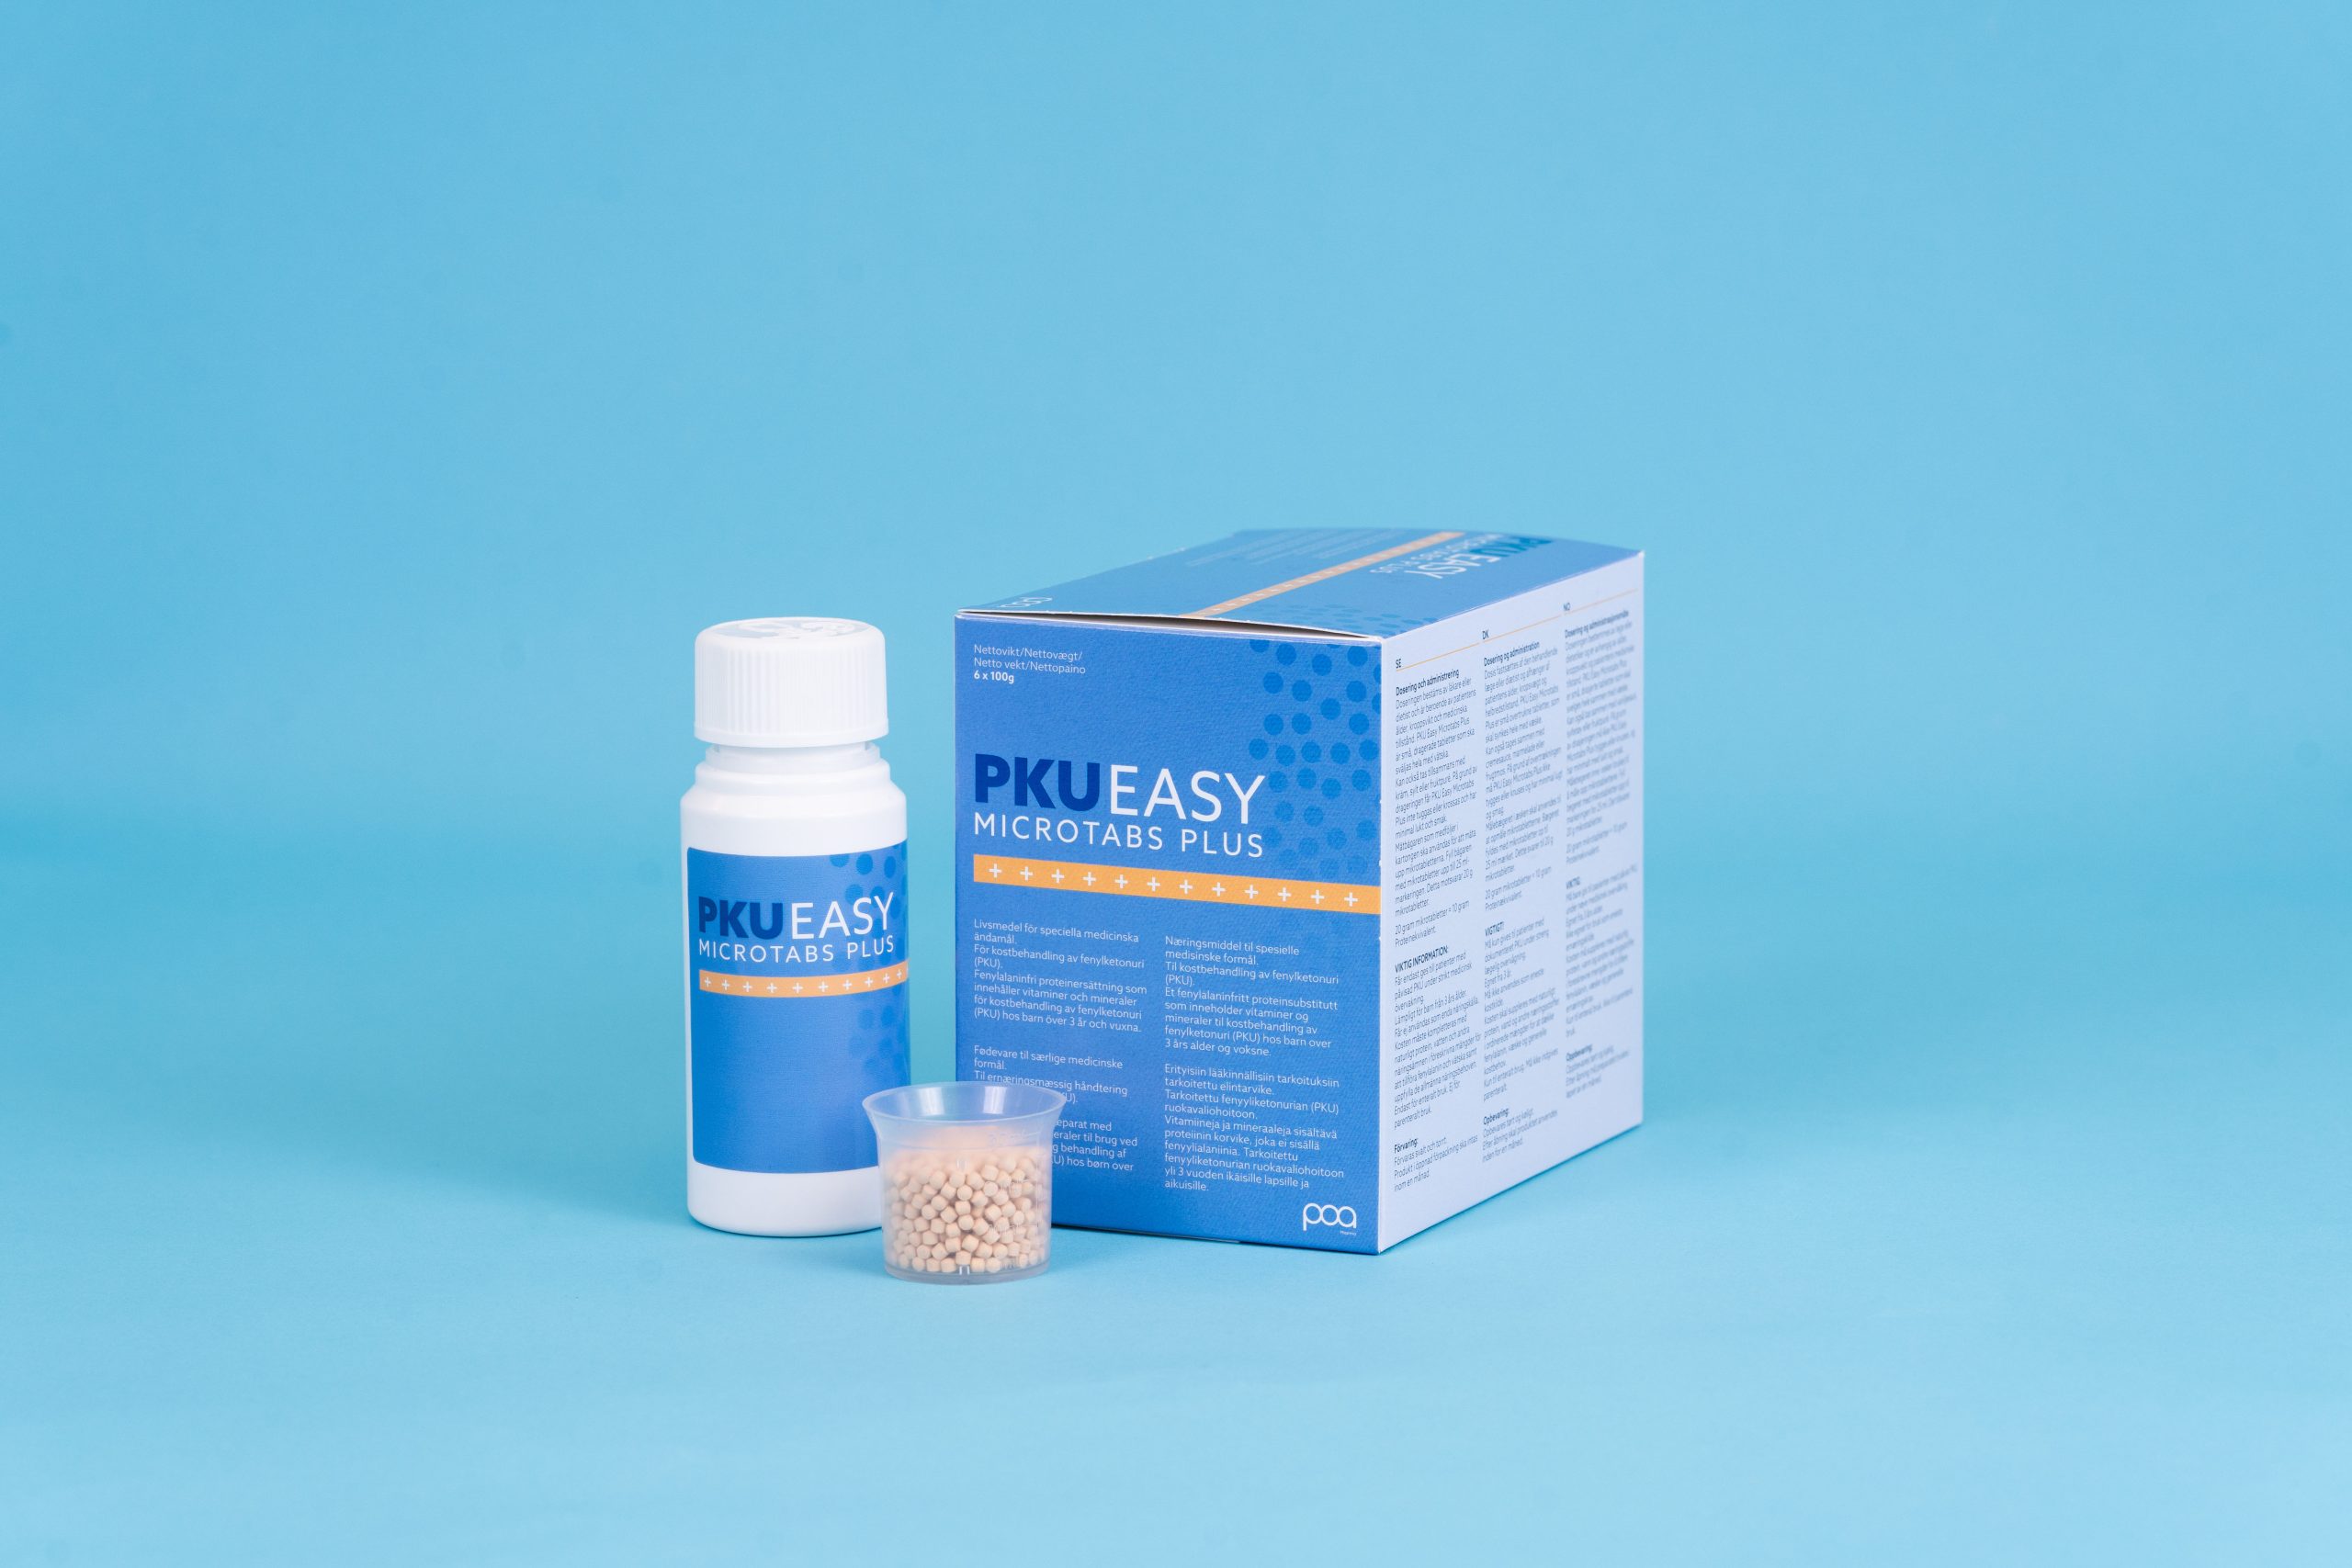 Galen Medical Nutrition announces the release of latest innovation: PKU Easy Microtabs Plus